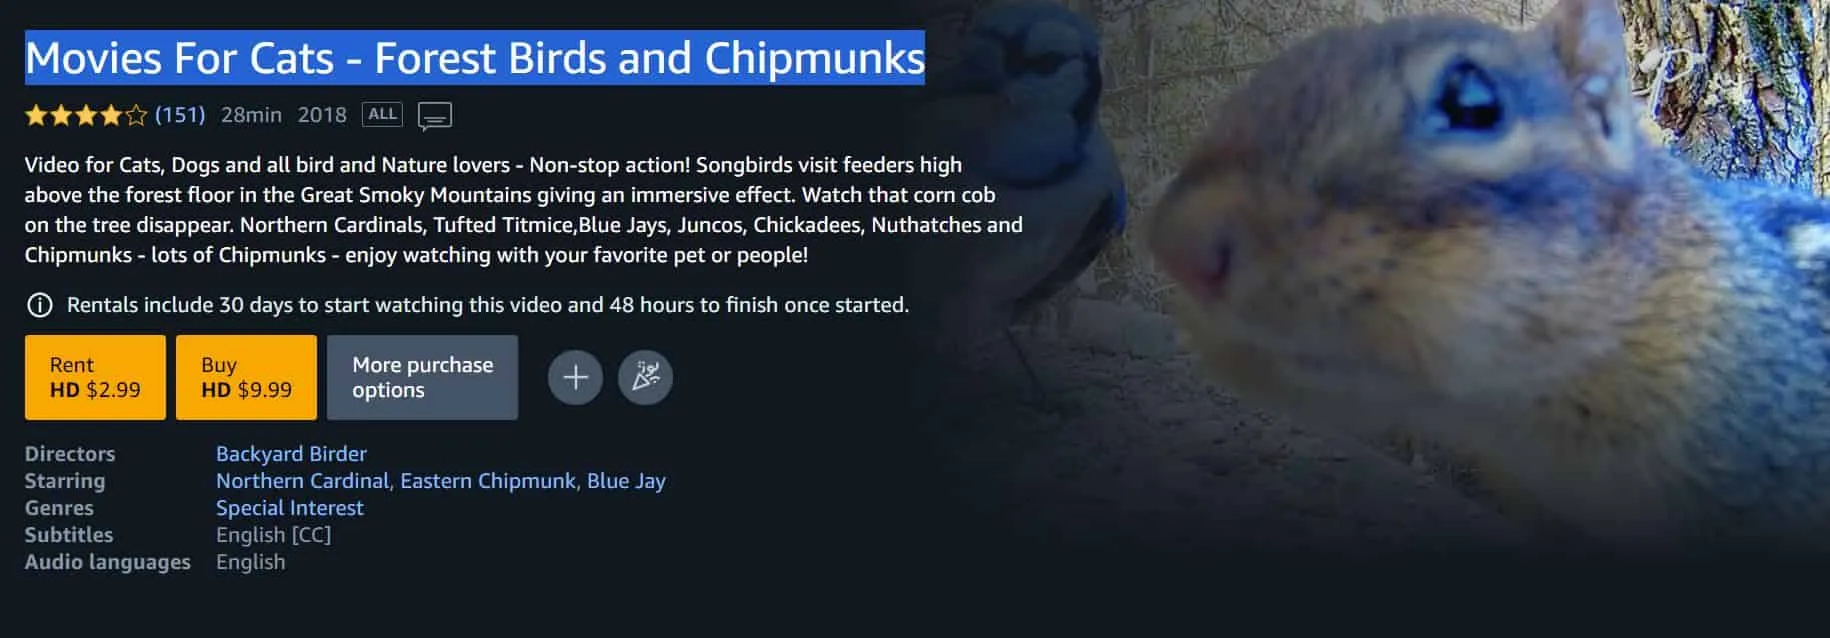 Movies for cats- Forest Birds and Chipmunks